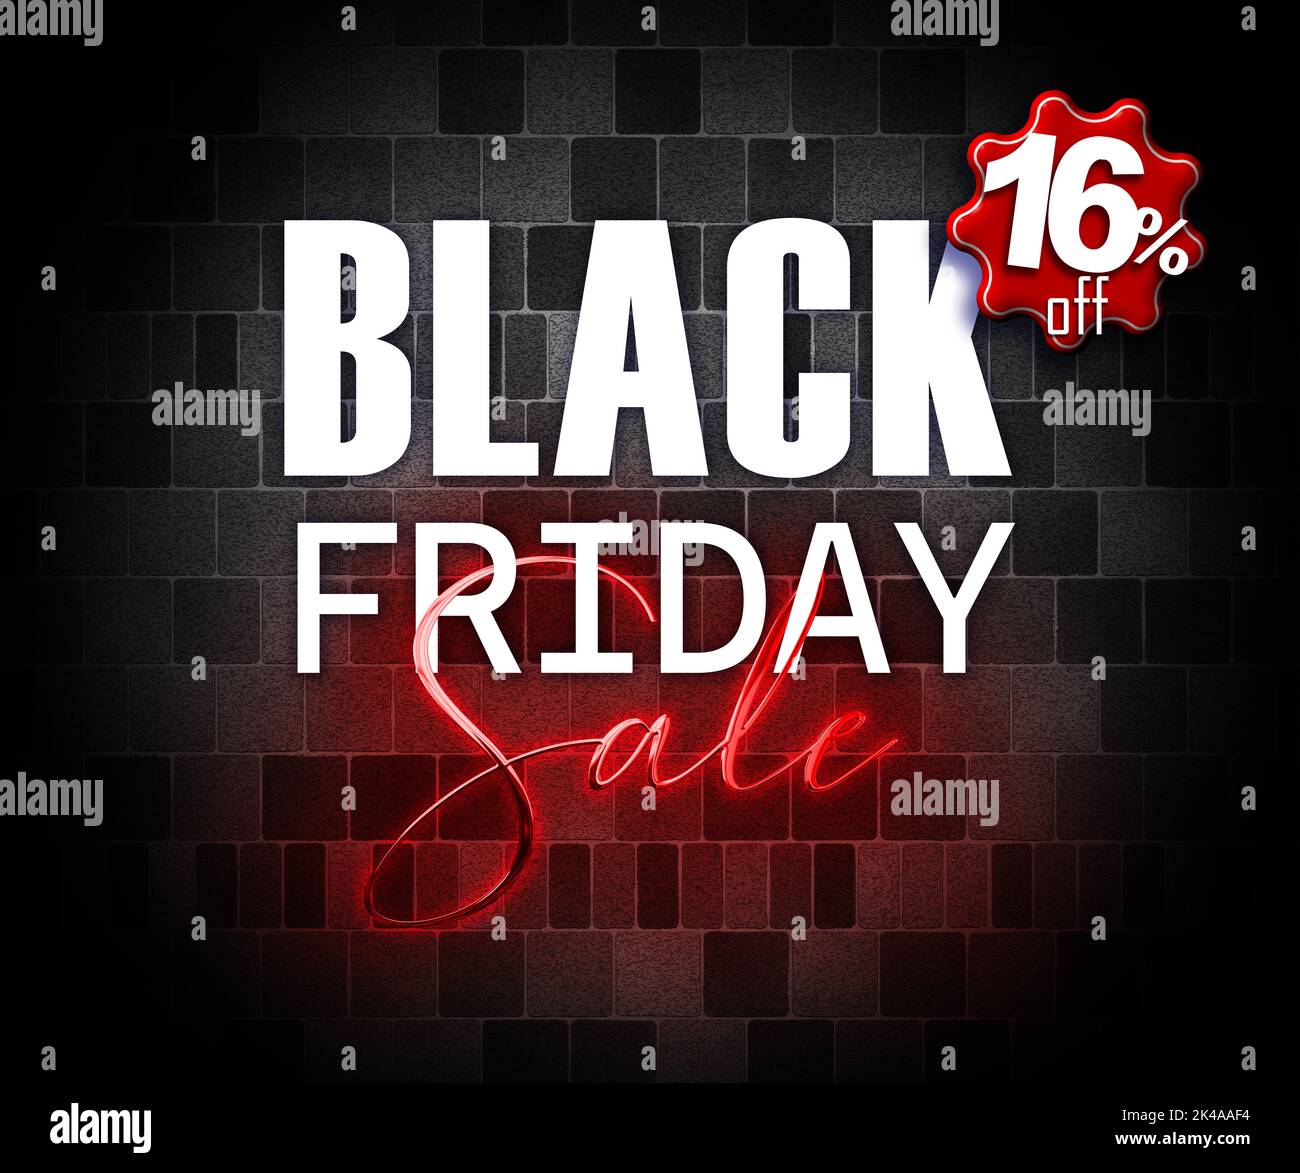 illustration with 3d elements black friday promotion banner 16 percent off sales increase Stock Photo